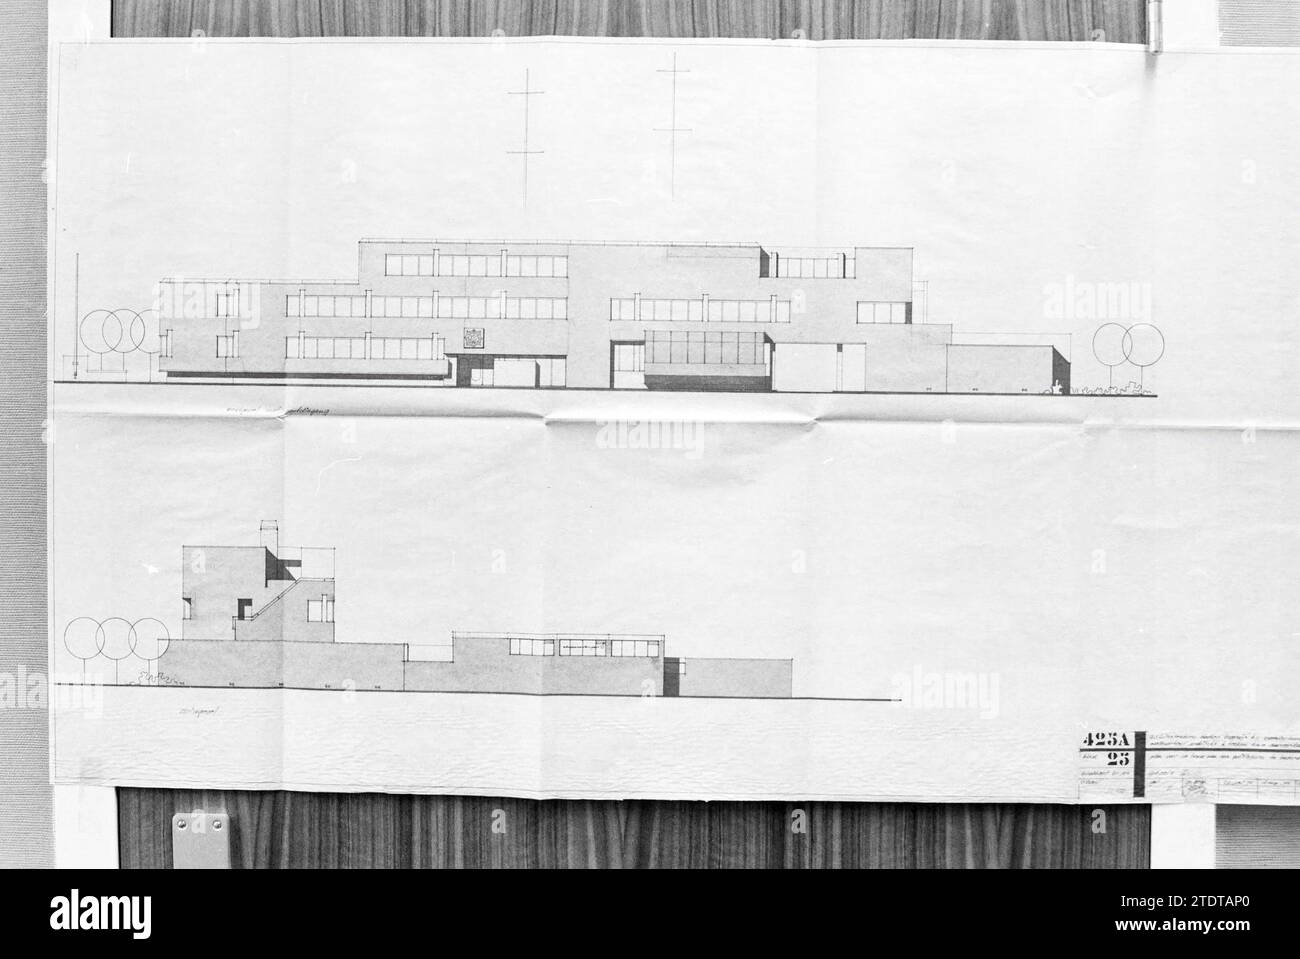 Design drawing of the exterior of the new Beverwijk police station, Beverwijk, The Netherlands, 10-01-1979, Whizgle News from the Past, Tailored for the Future. Explore historical narratives, Dutch The Netherlands agency image with a modern perspective, bridging the gap between yesterday's events and tomorrow's insights. A timeless journey shaping the stories that shape our future Stock Photo